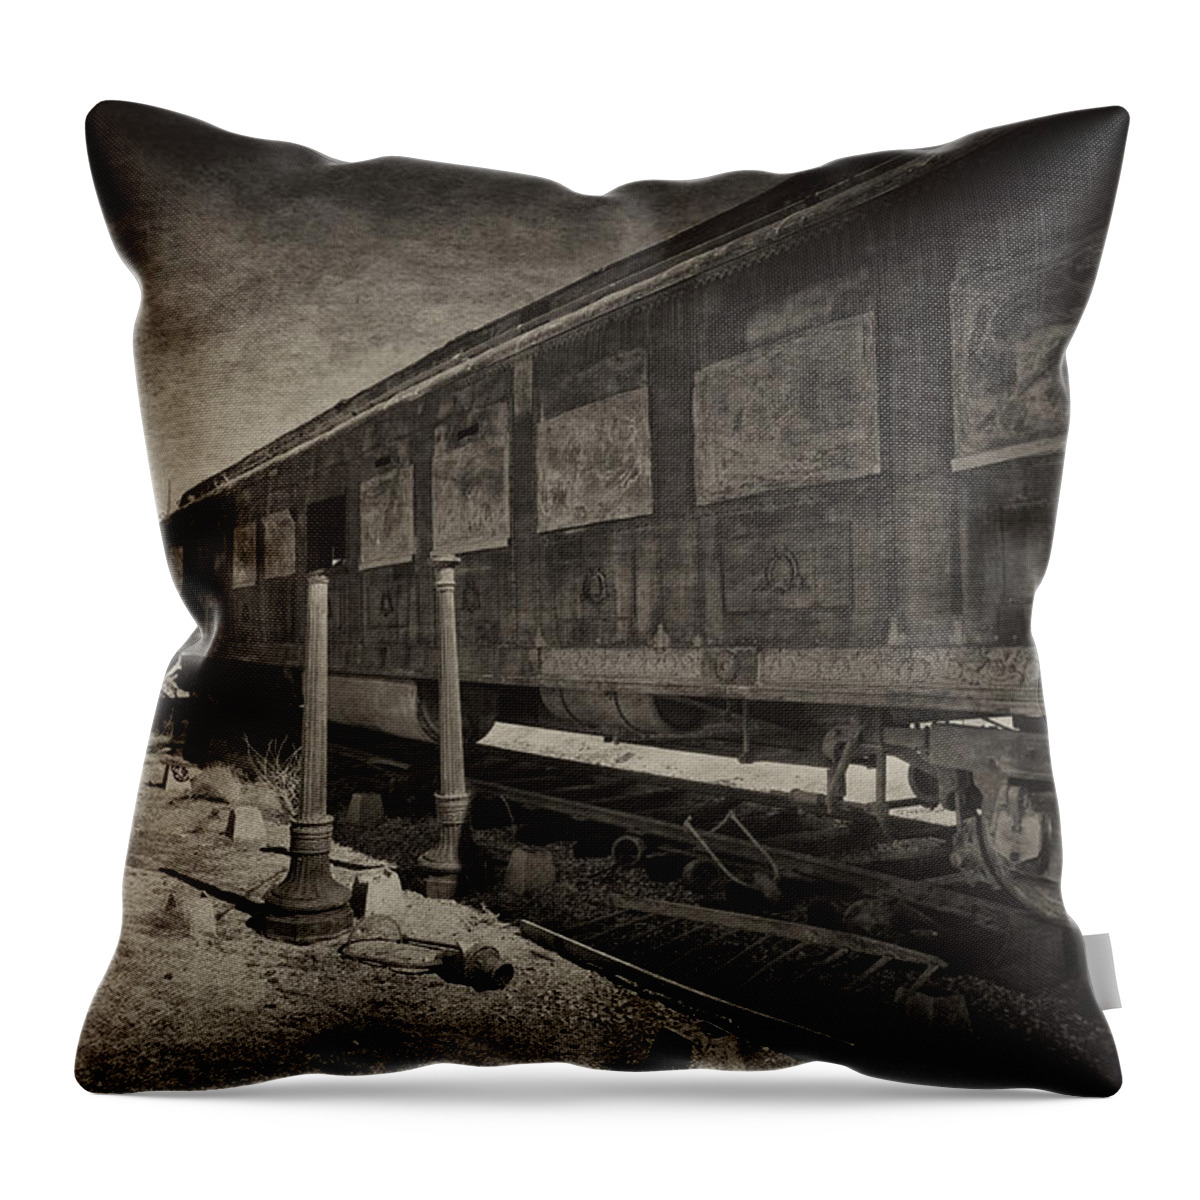 The Scarlet Lady Train Car Throw Pillow featuring the photograph The Scarlet Lady Vintage Plate 1 by Sandra Selle Rodriguez